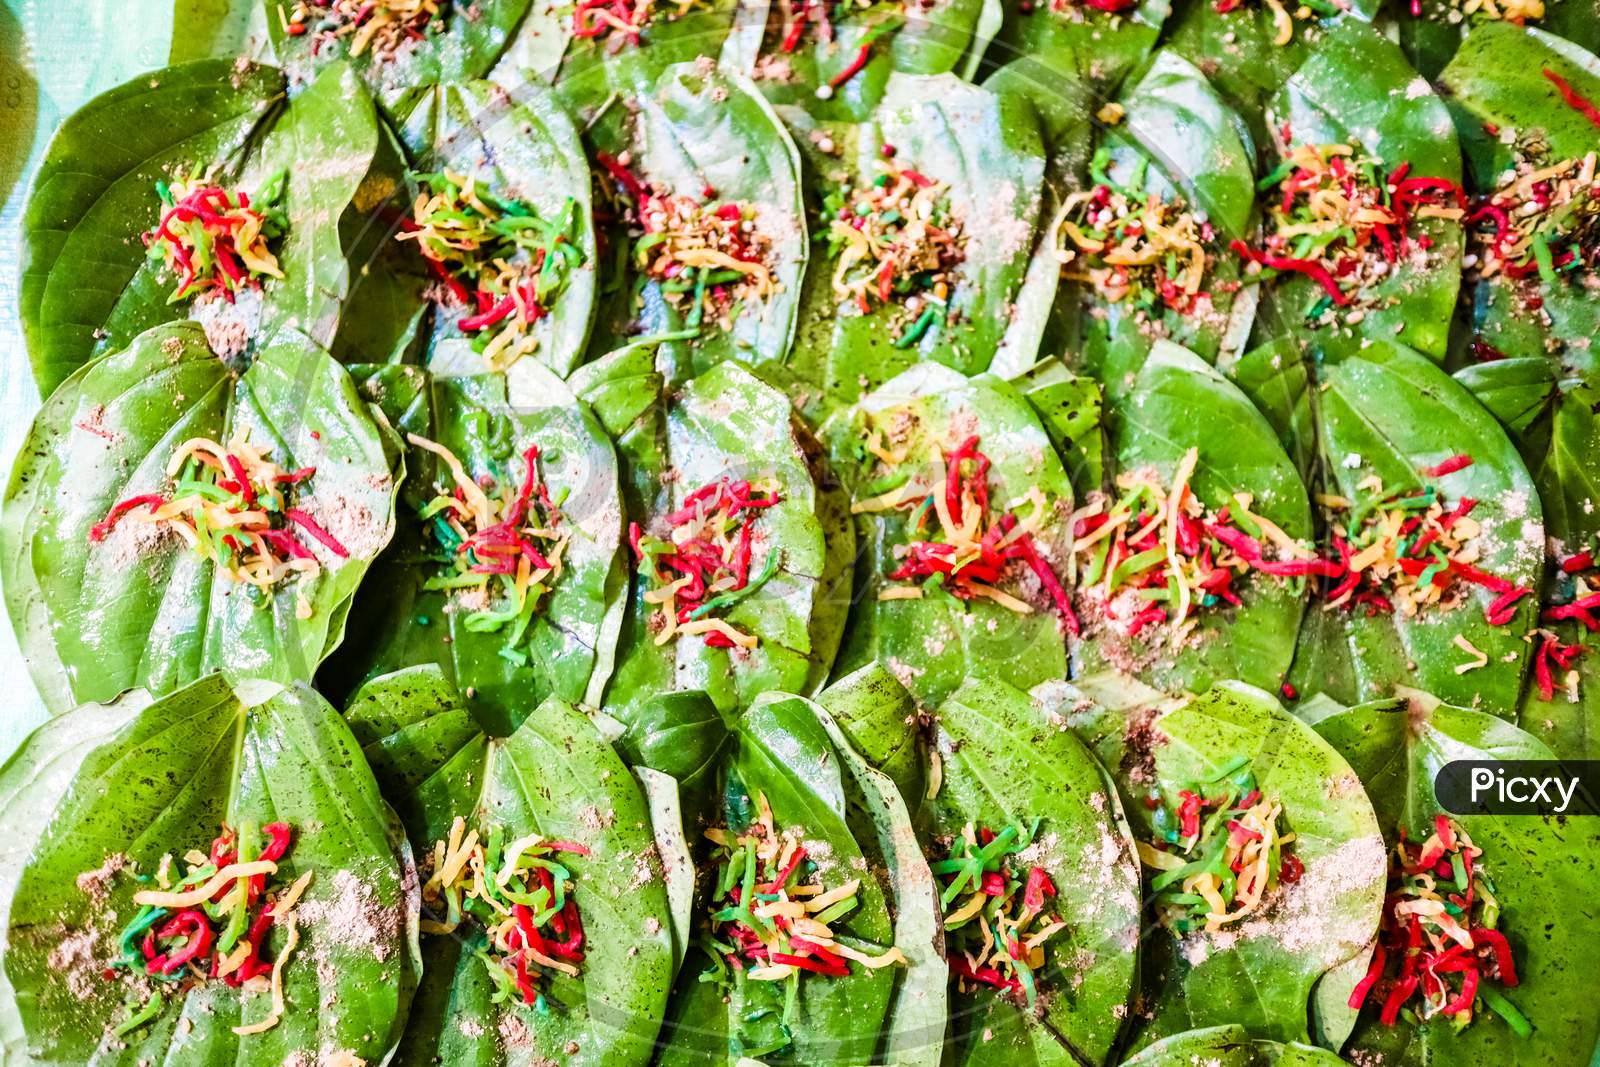 Collection Of Banarasi Paan Betel Leaf With Masala Displayed With Displayed For Sale At A Shop